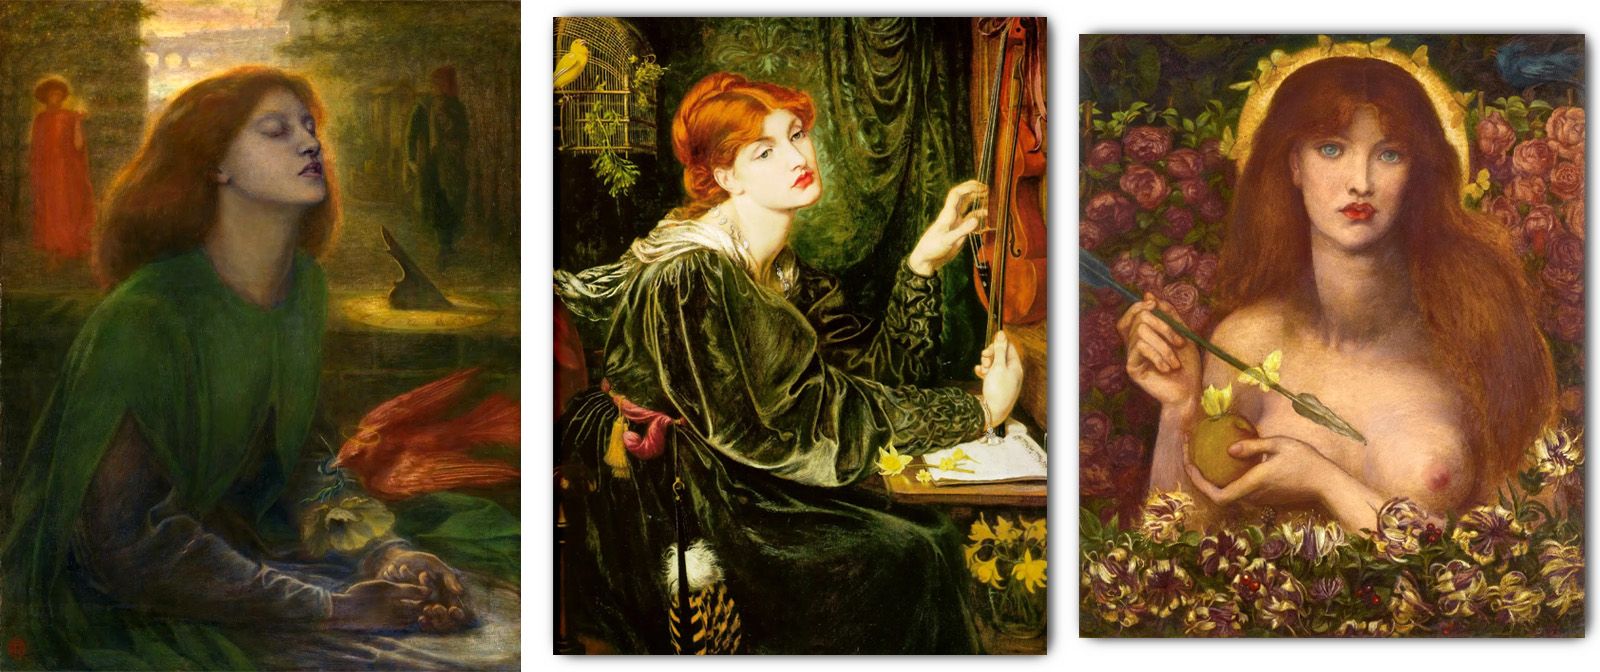 Immodest red-haired beauties in the paintings of Pre-Raphaelite Dante Gabriel Rossetti